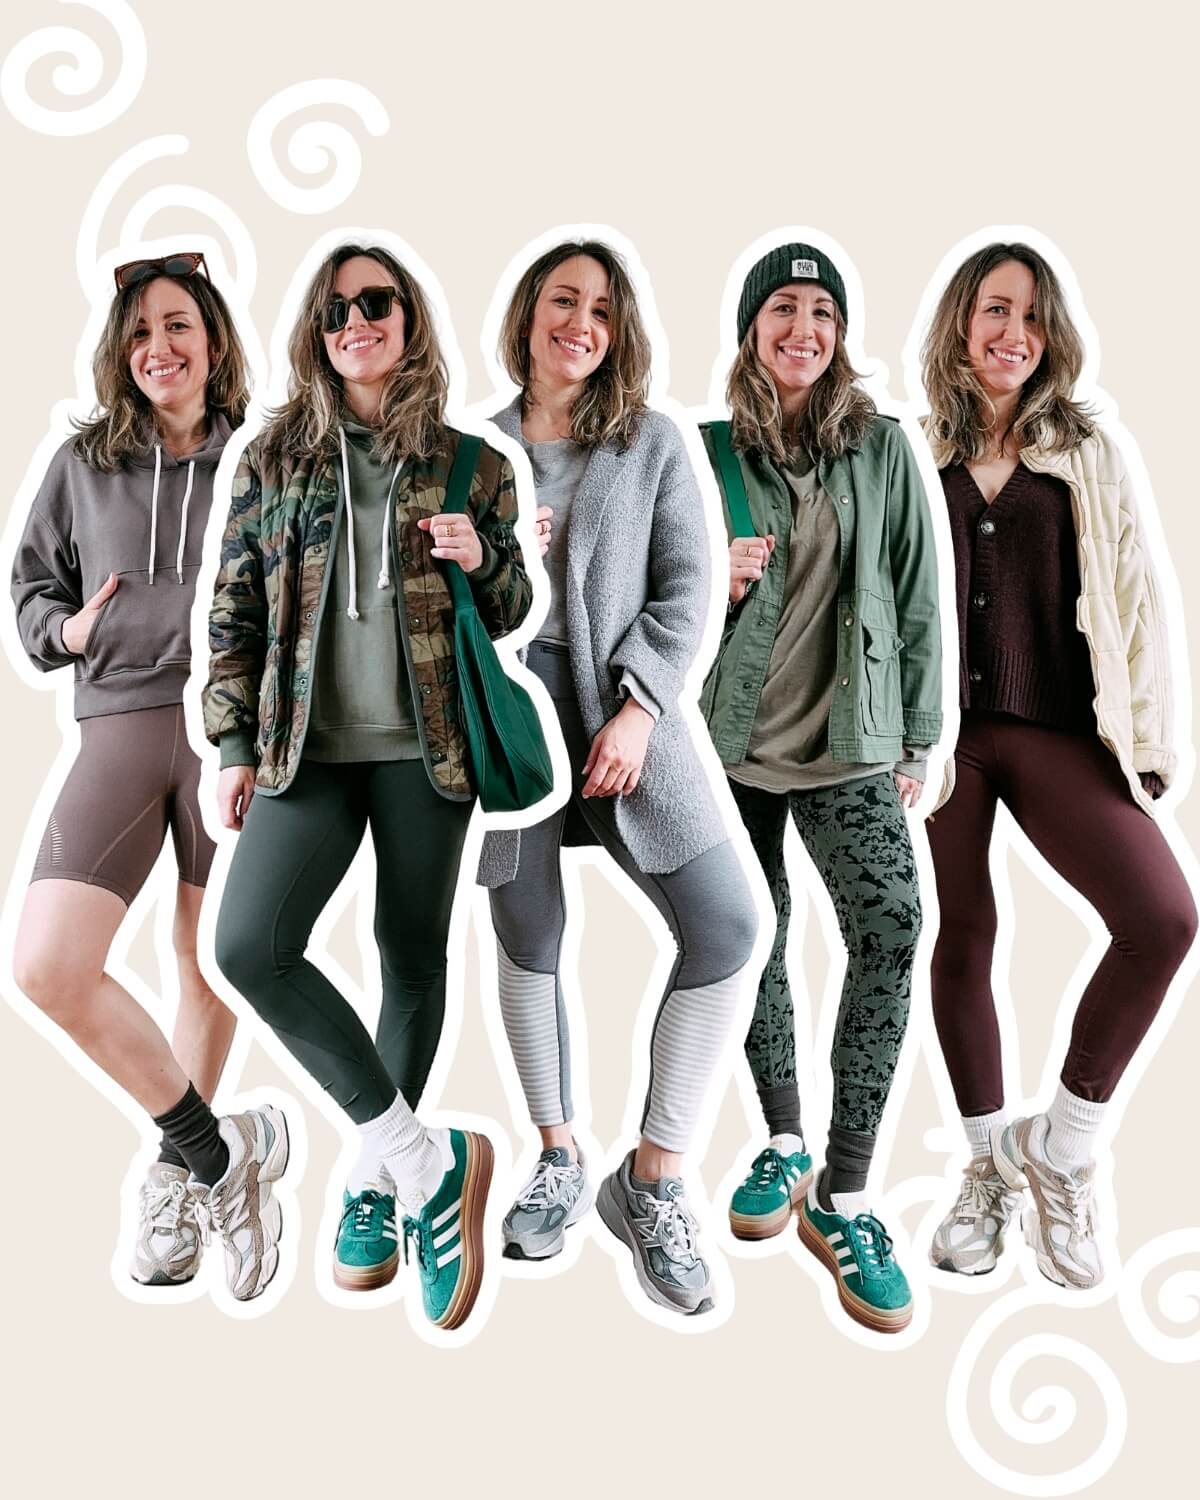 Collage of 5 women wearing different leggings athleisure outfits.